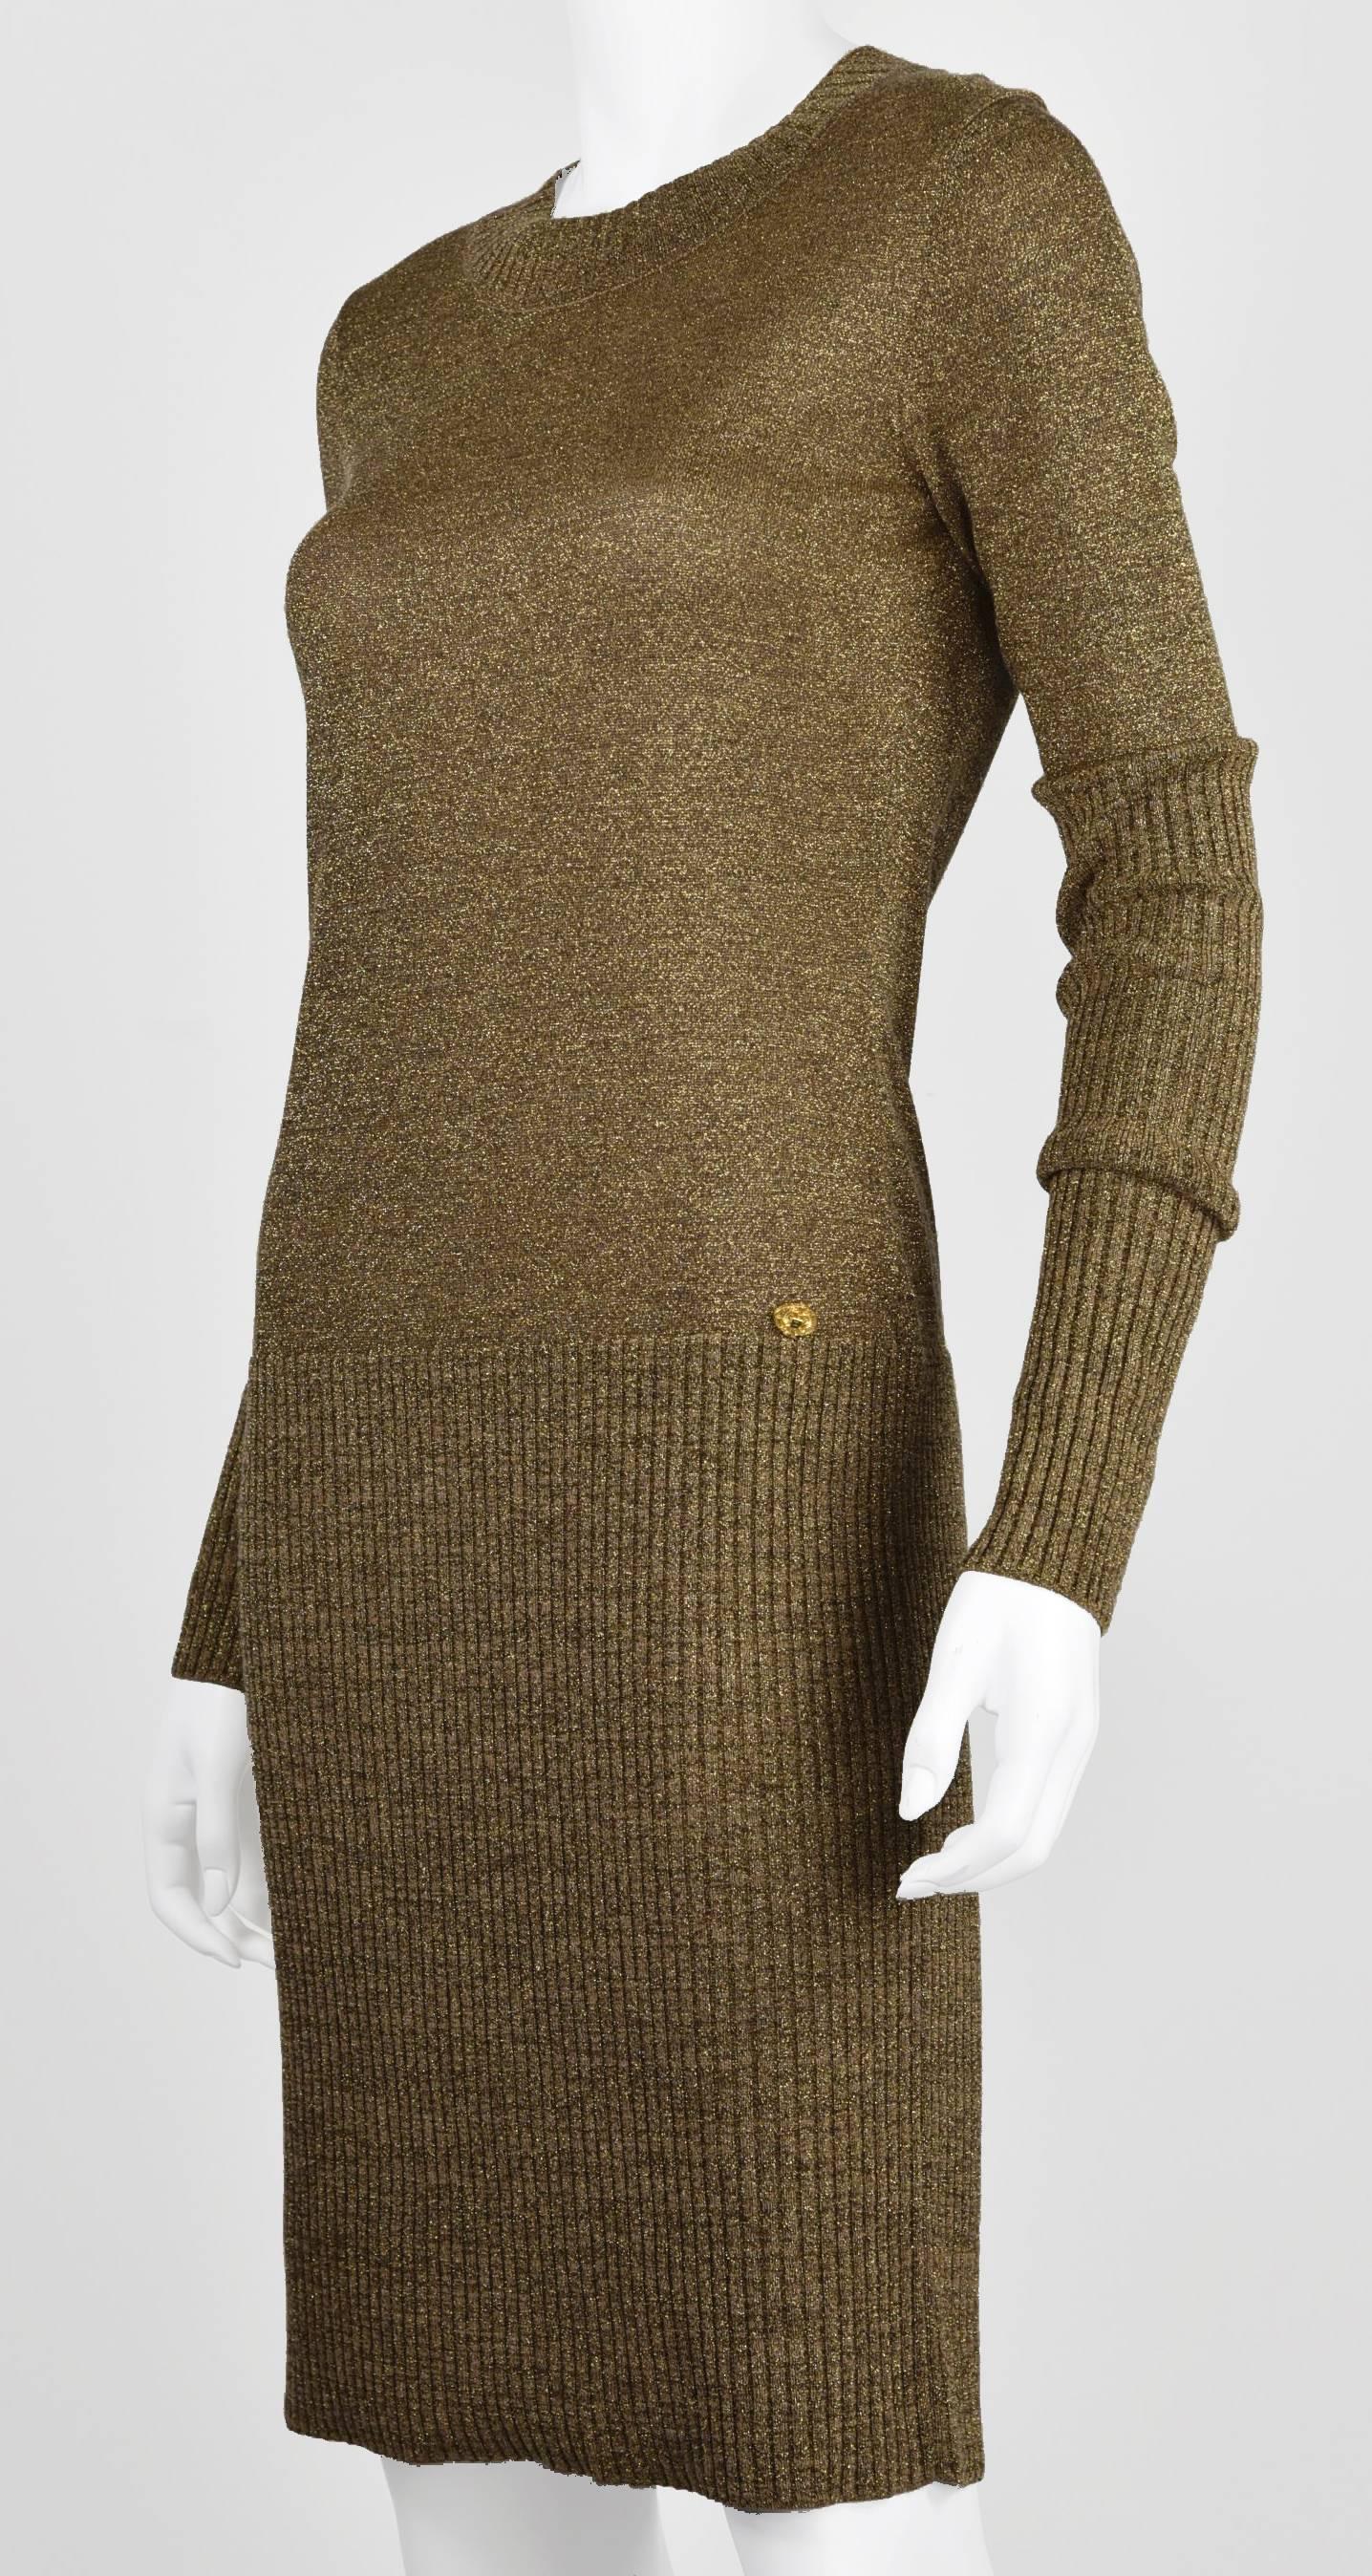 One cannot have enough neutral sheath dresses to wear underneath a variety of jackets and  coats.  This is one with its form fitting knit and beautifully focused rich and subdued gold metallic thread.  Measurements:  Height 39